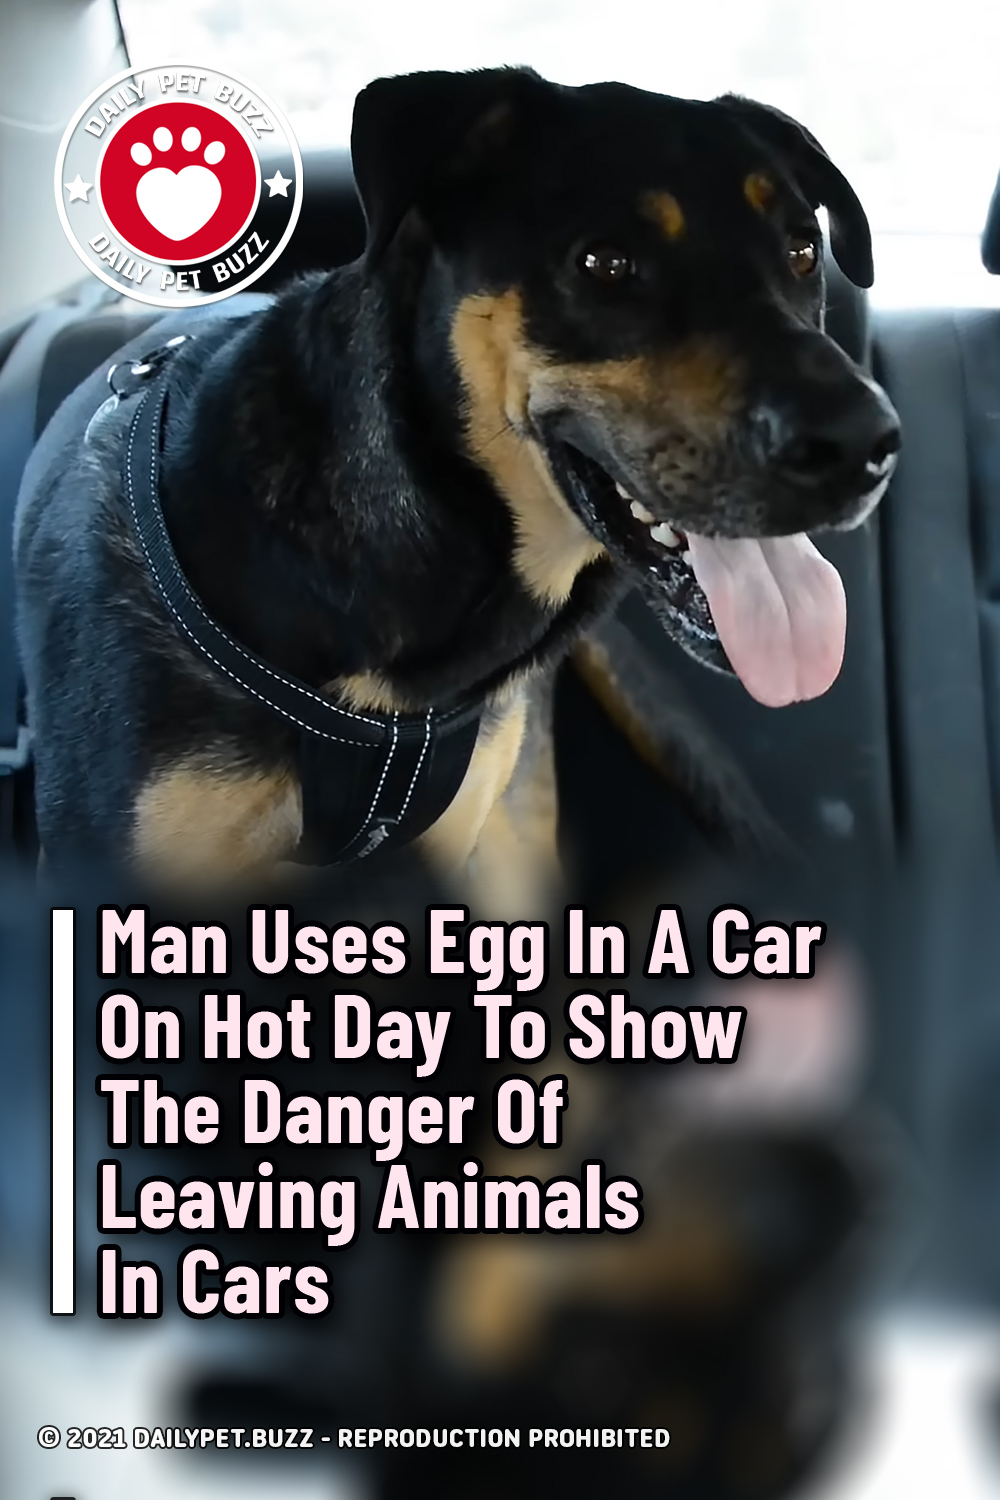 Man Uses Egg In A Car On Hot Day To Show The Danger Of Leaving Animals In Cars